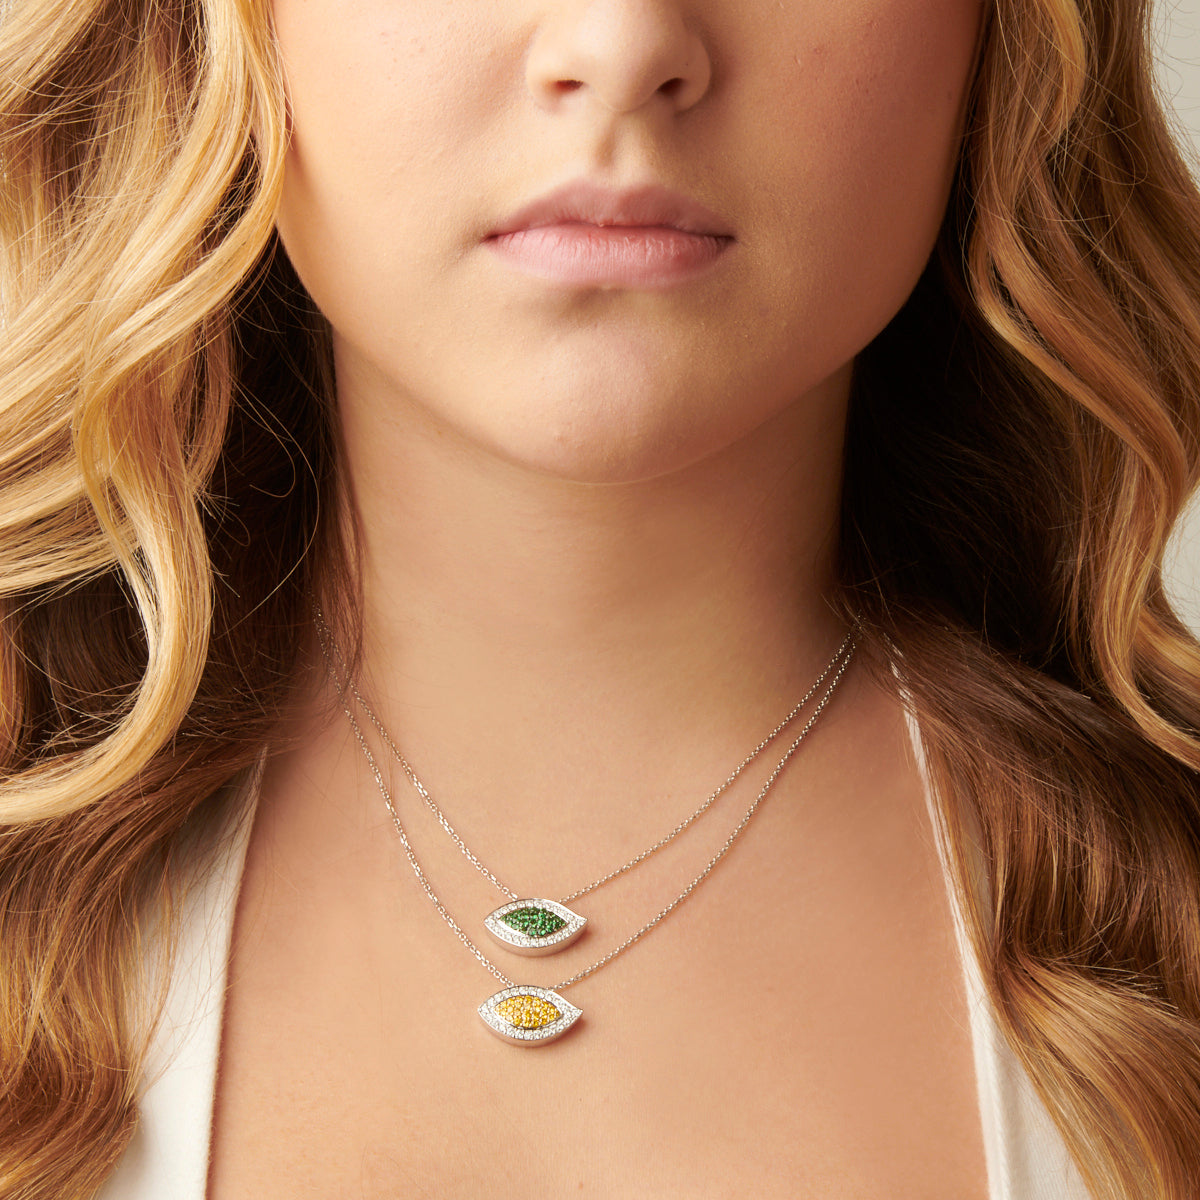 This image shows a woman wearing the Evil Eye Tsavorite and Diamond Pendant. The pendant is hanging from a delicate chain and is centered on the woman's chest. The pendant is a beautiful complement to the woman's outfit and adds a touch of luxury and elegance.